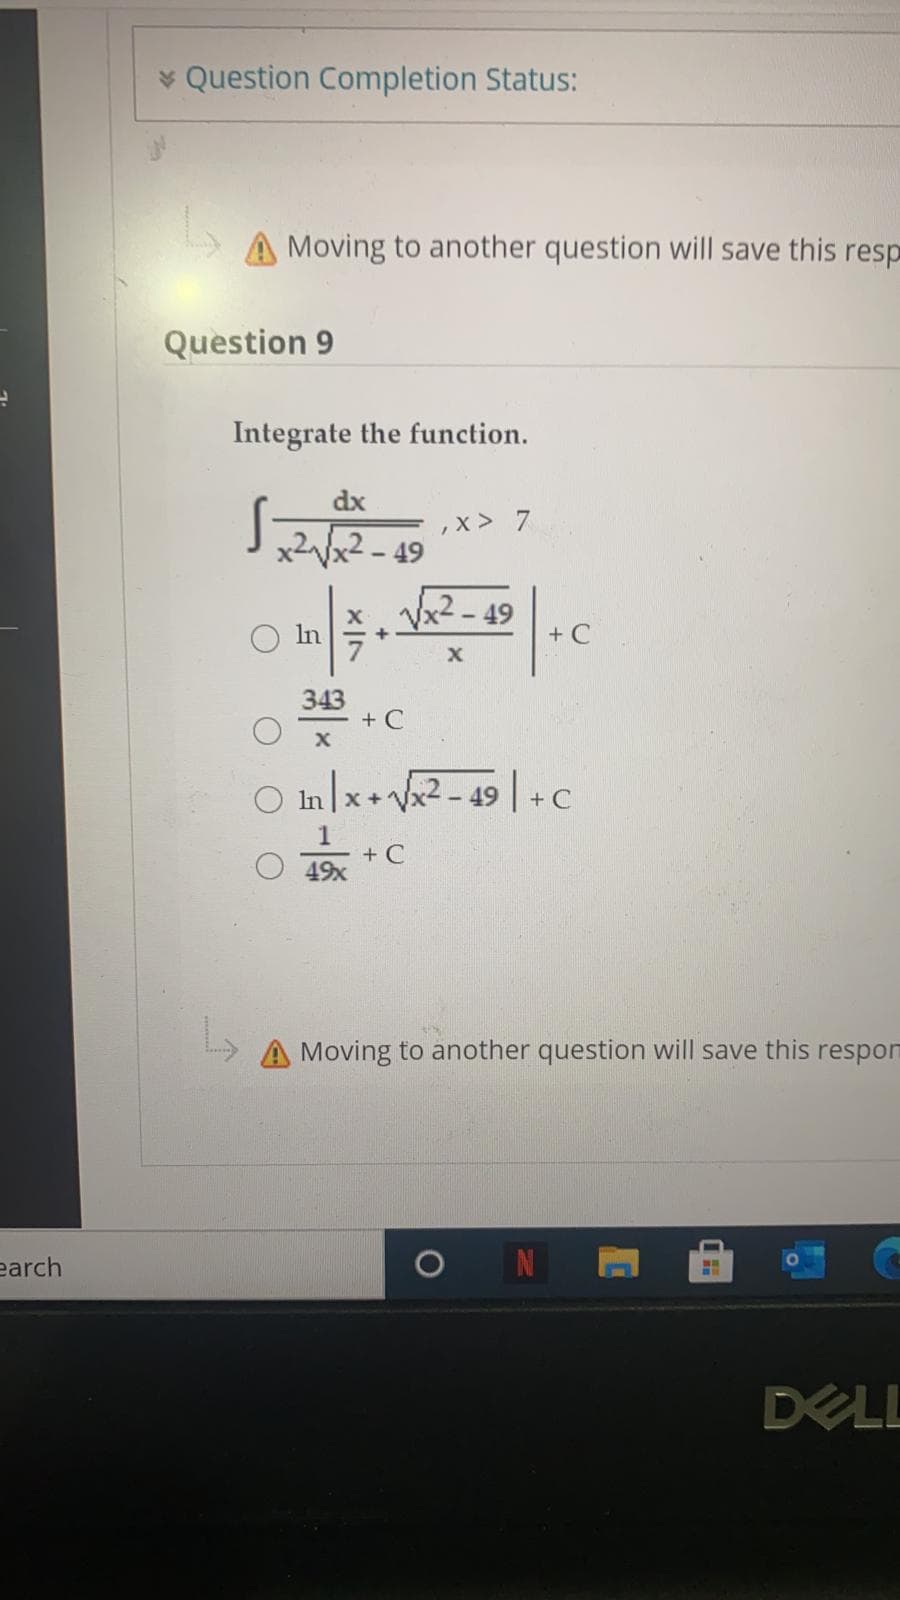 * Question Completion Status:
Moving to another question will save this
Question 9
Integrate the function.
dx
,x > 7
-49
x2-49
+ C
In
343
+ C
O Inx+V2 - 49 | + C
+ C
49x
